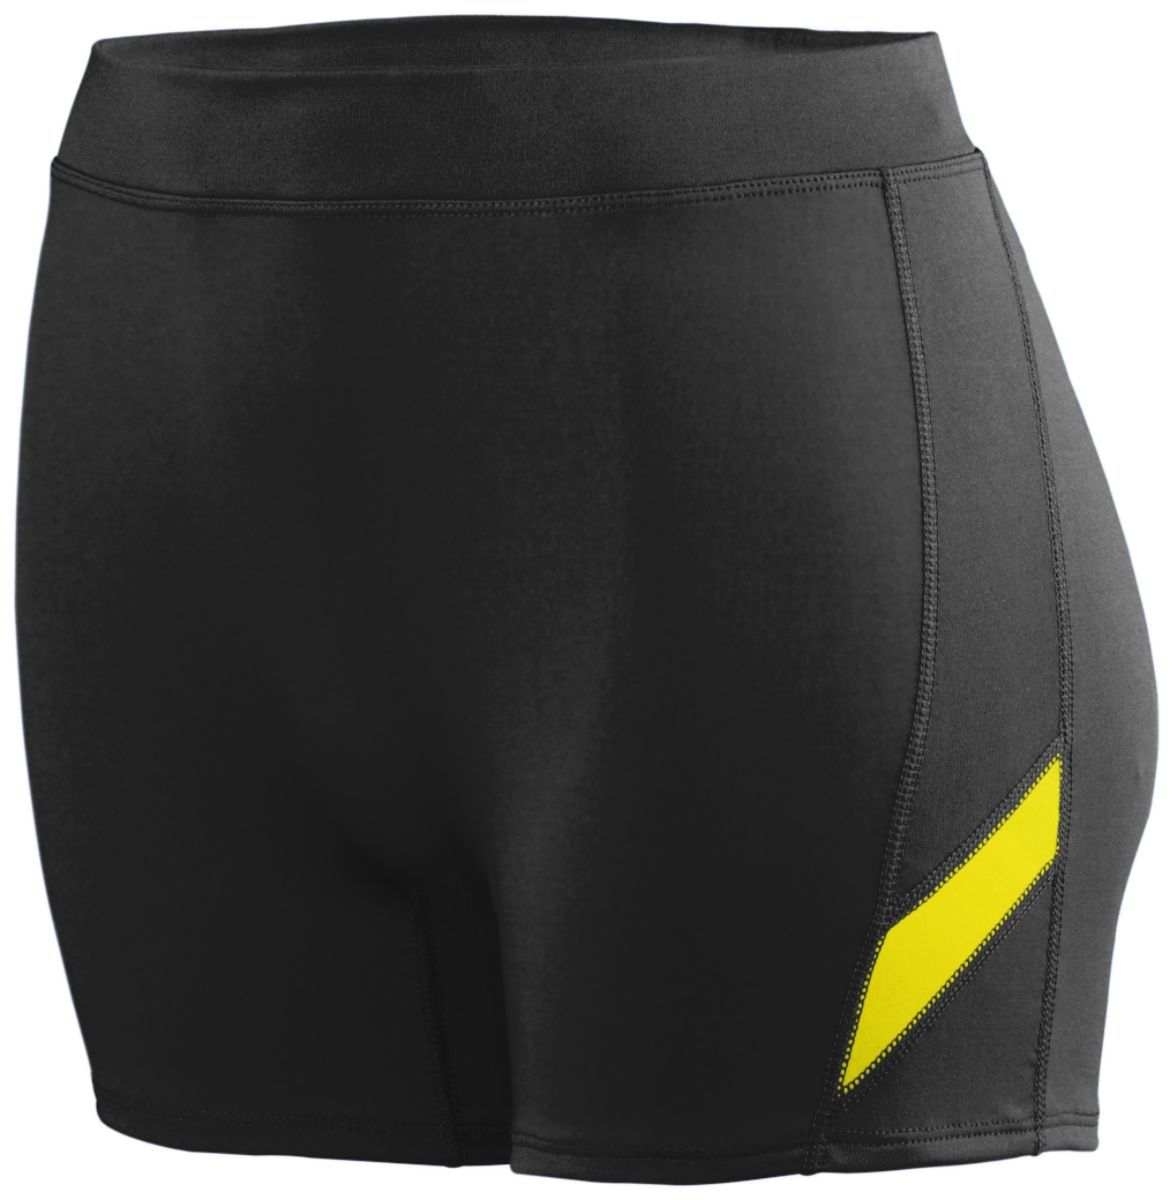 Augusta Sportswear Girls Stride Shorts in Black/Power Yellow  -Part of the Girls, Augusta-Products, Volleyball, Girls-Shorts product lines at KanaleyCreations.com